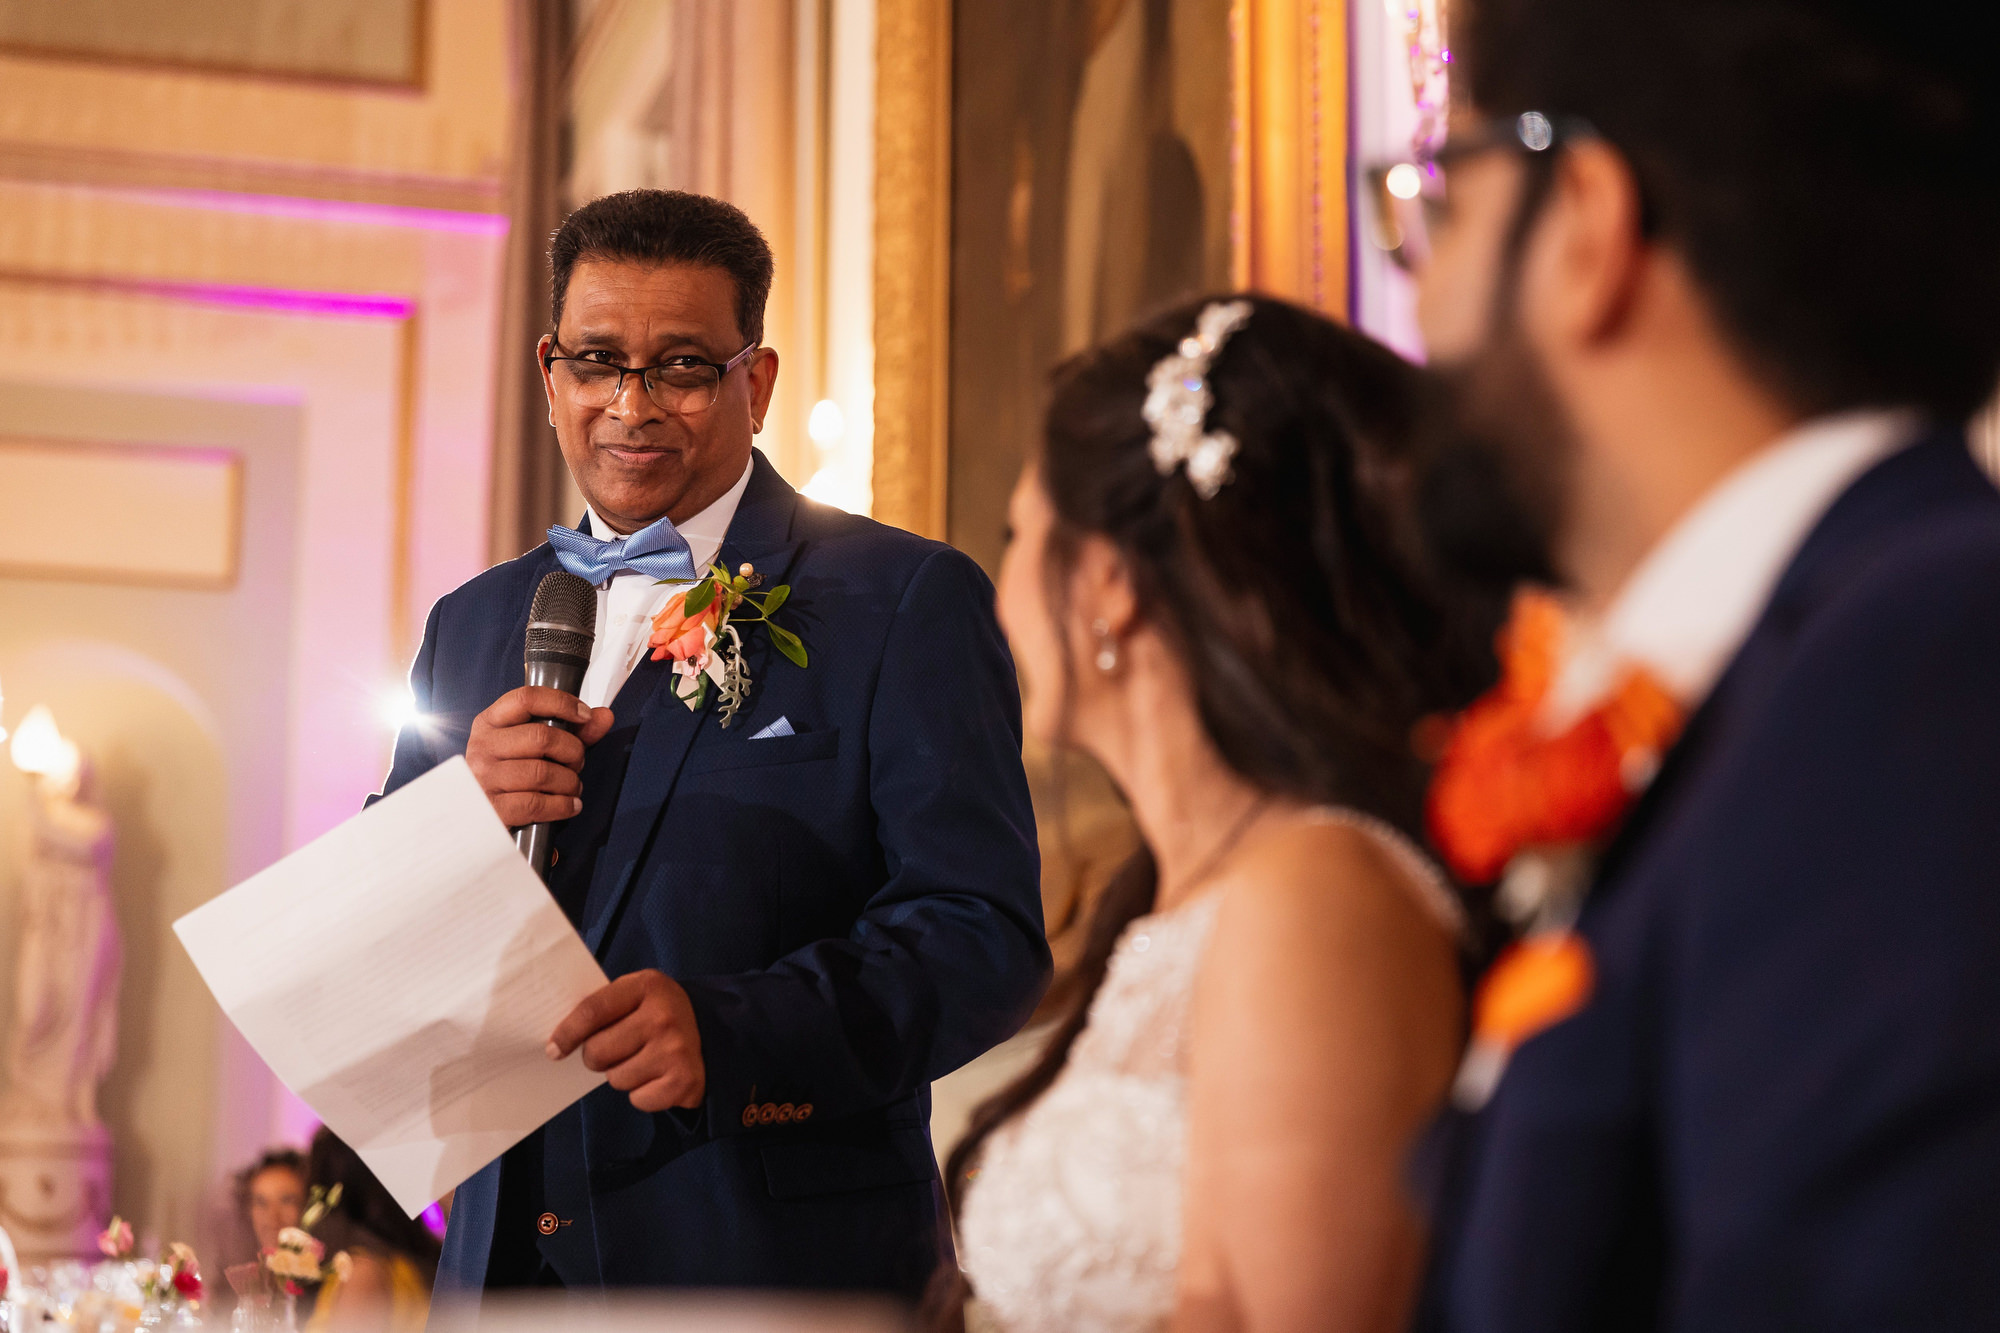 The City Rooms, Leicester, Documentary Wedding Photographer, Father of bride speech